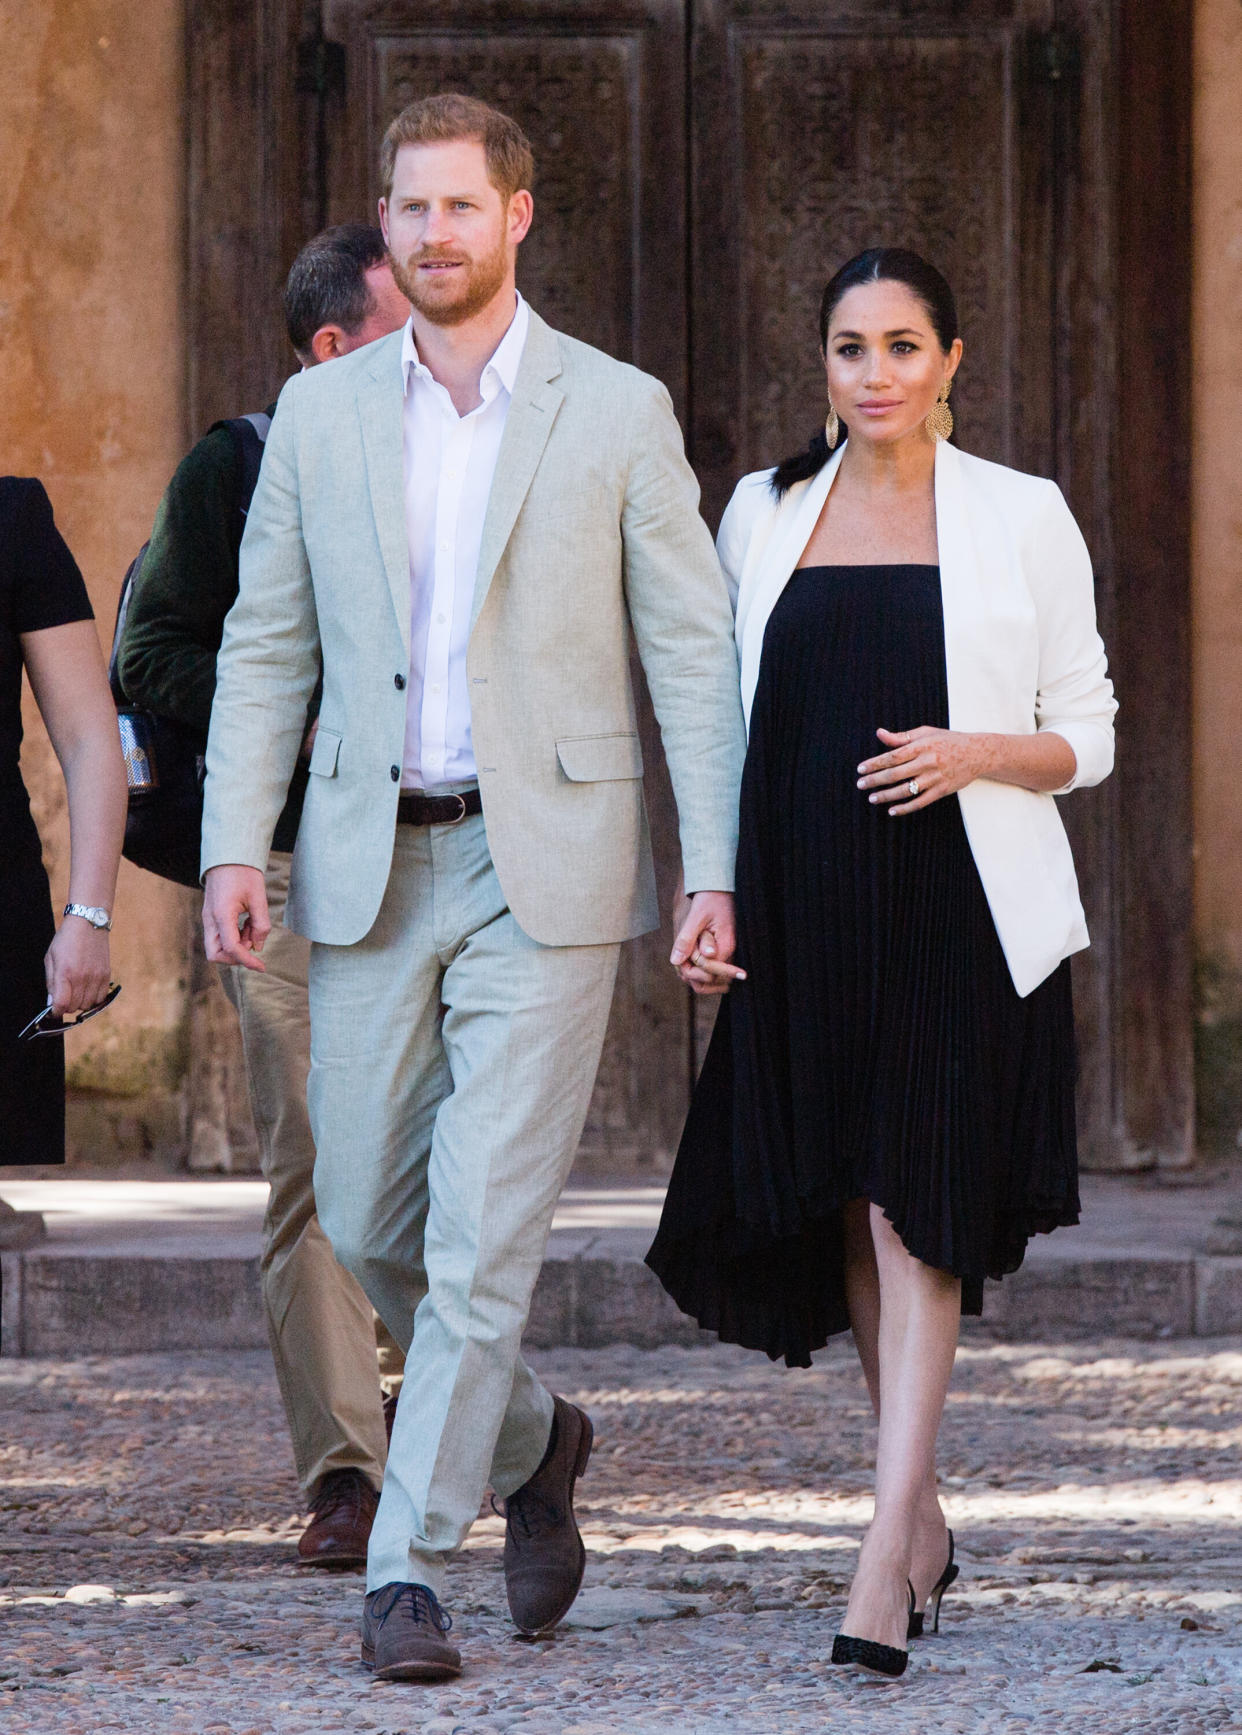 Harry and Meghan visit the Andalusian Gardens to hear about youth empowerment in Rabat, Morocco.